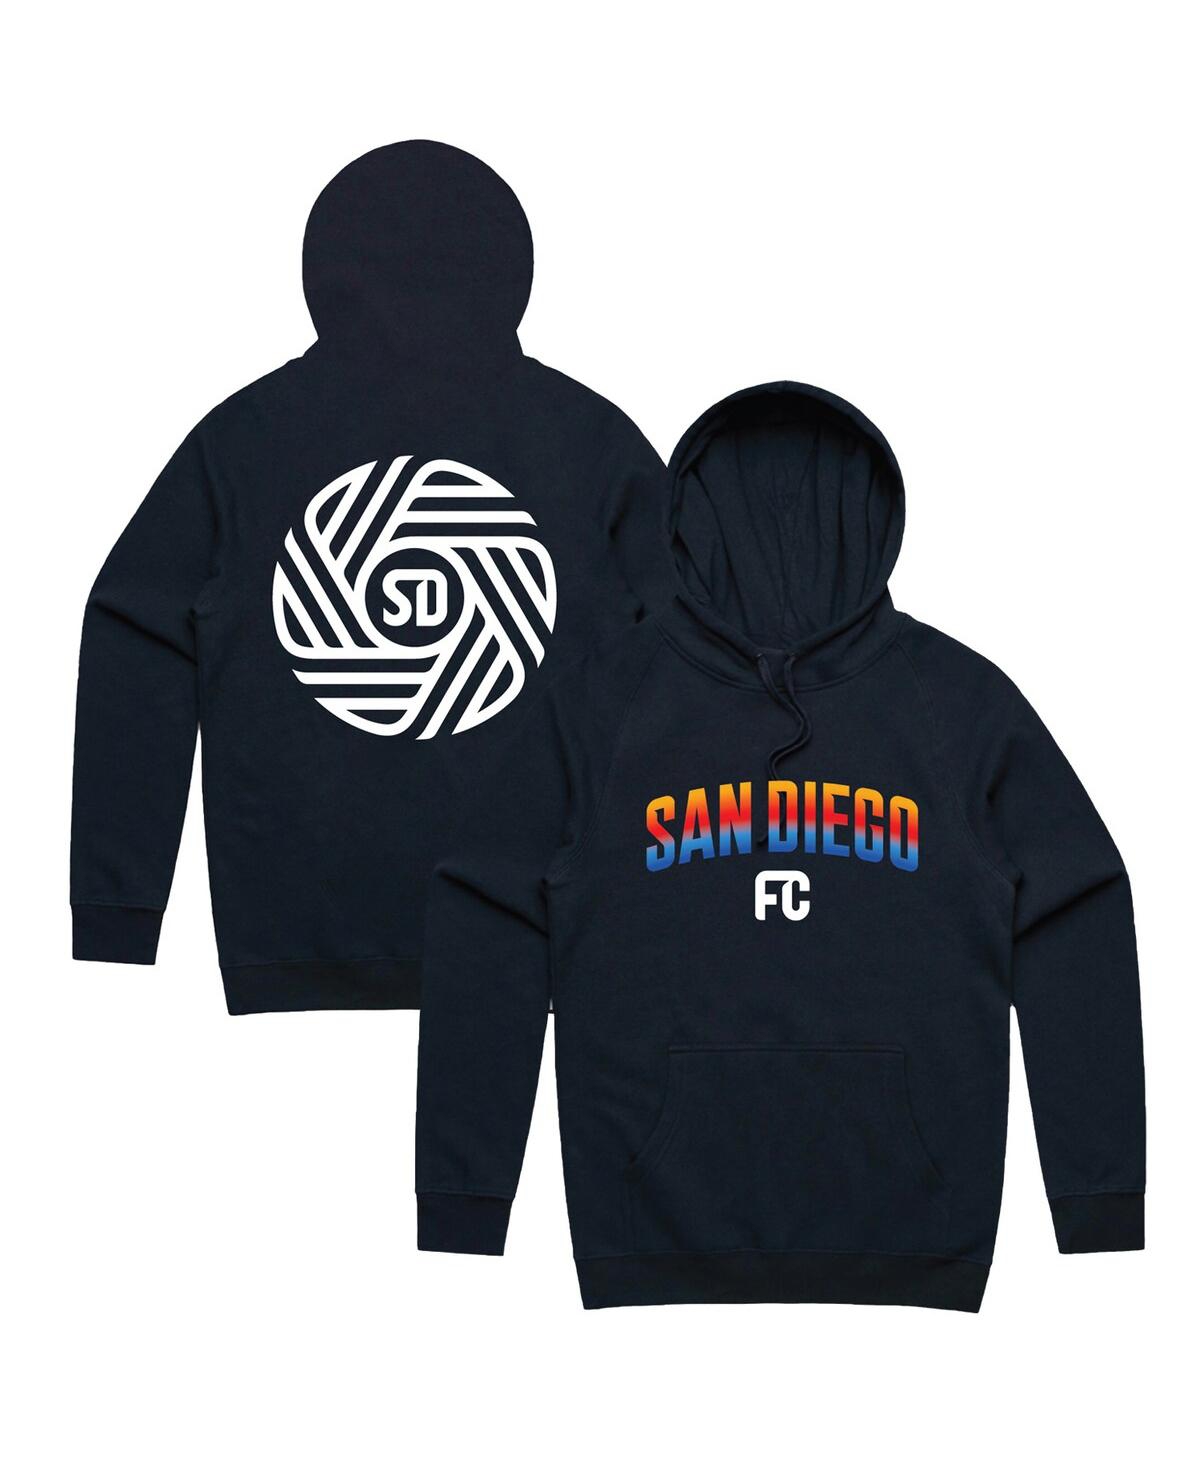 Men's and Women's Peace Collective Navy San Diego Fc Community Pullover Hoodie - Navy